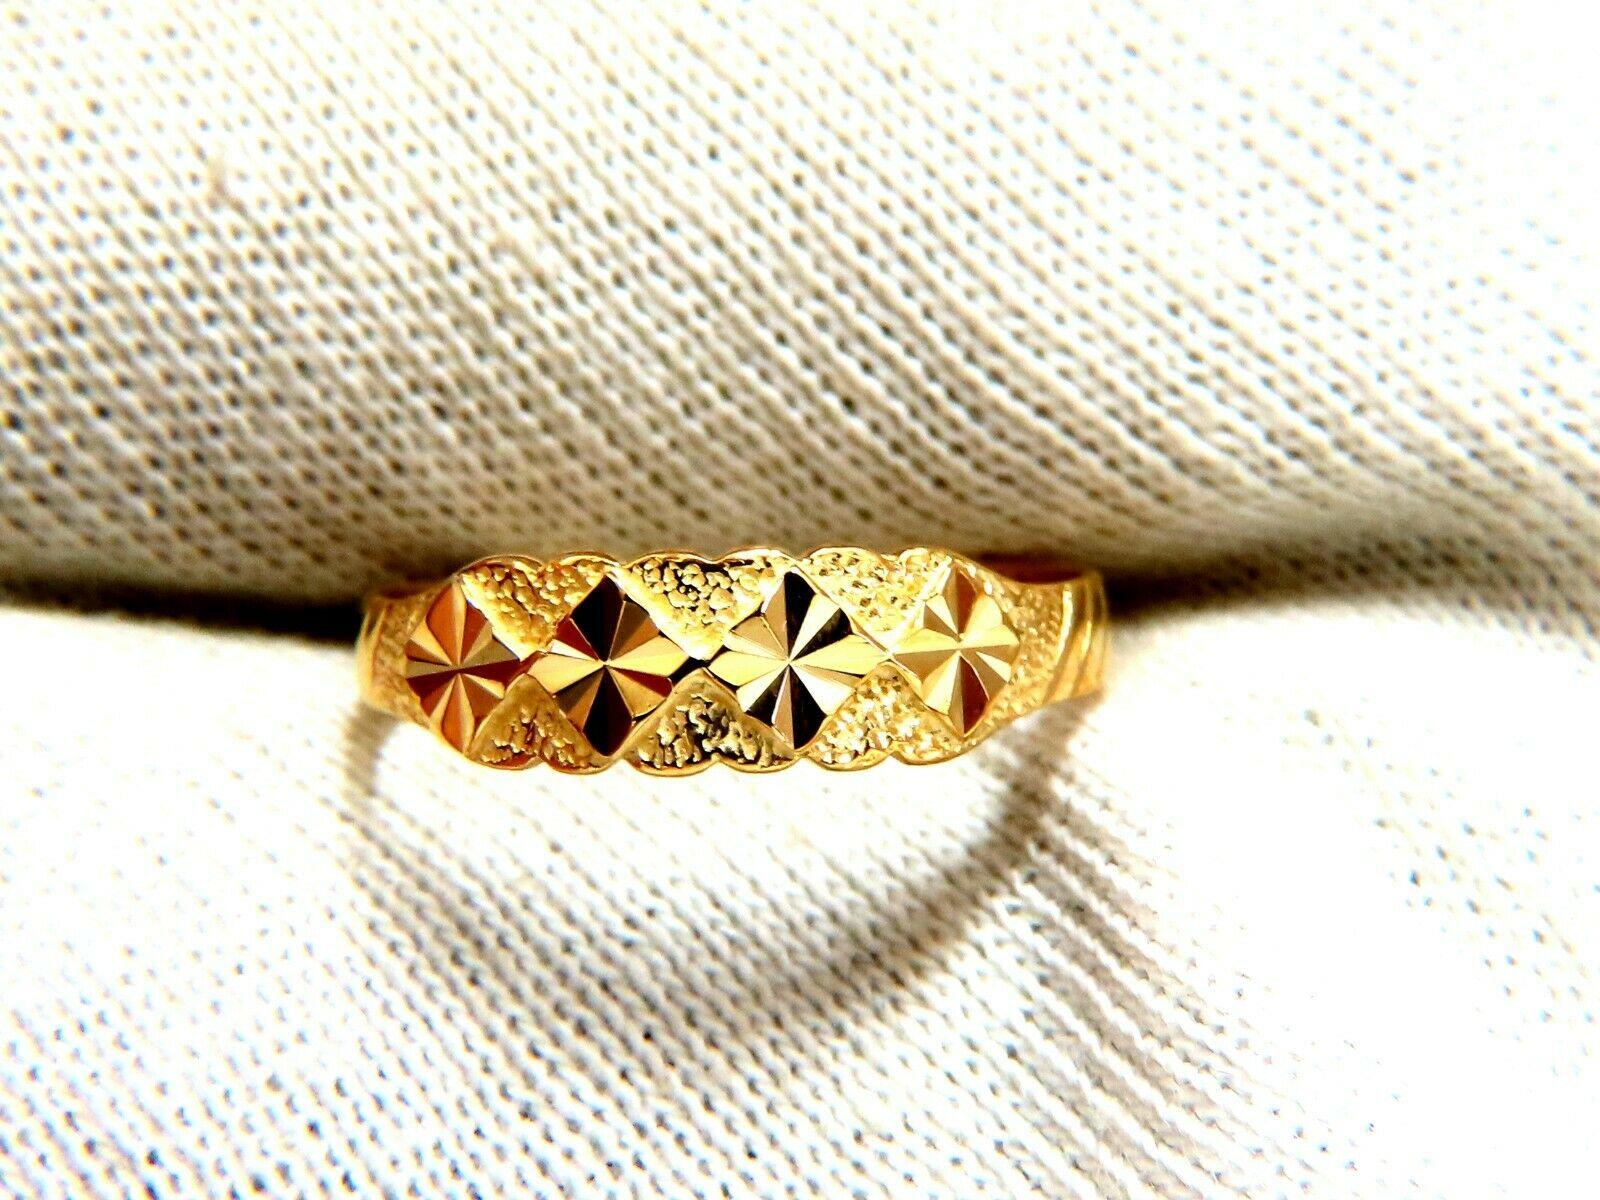 Prism inlay flat gold band.

Solid, high shine gold finish.

5.6mm wide

Depth: 1.5mm

18 karat yellow gold.

2.5 Grams

Size 8